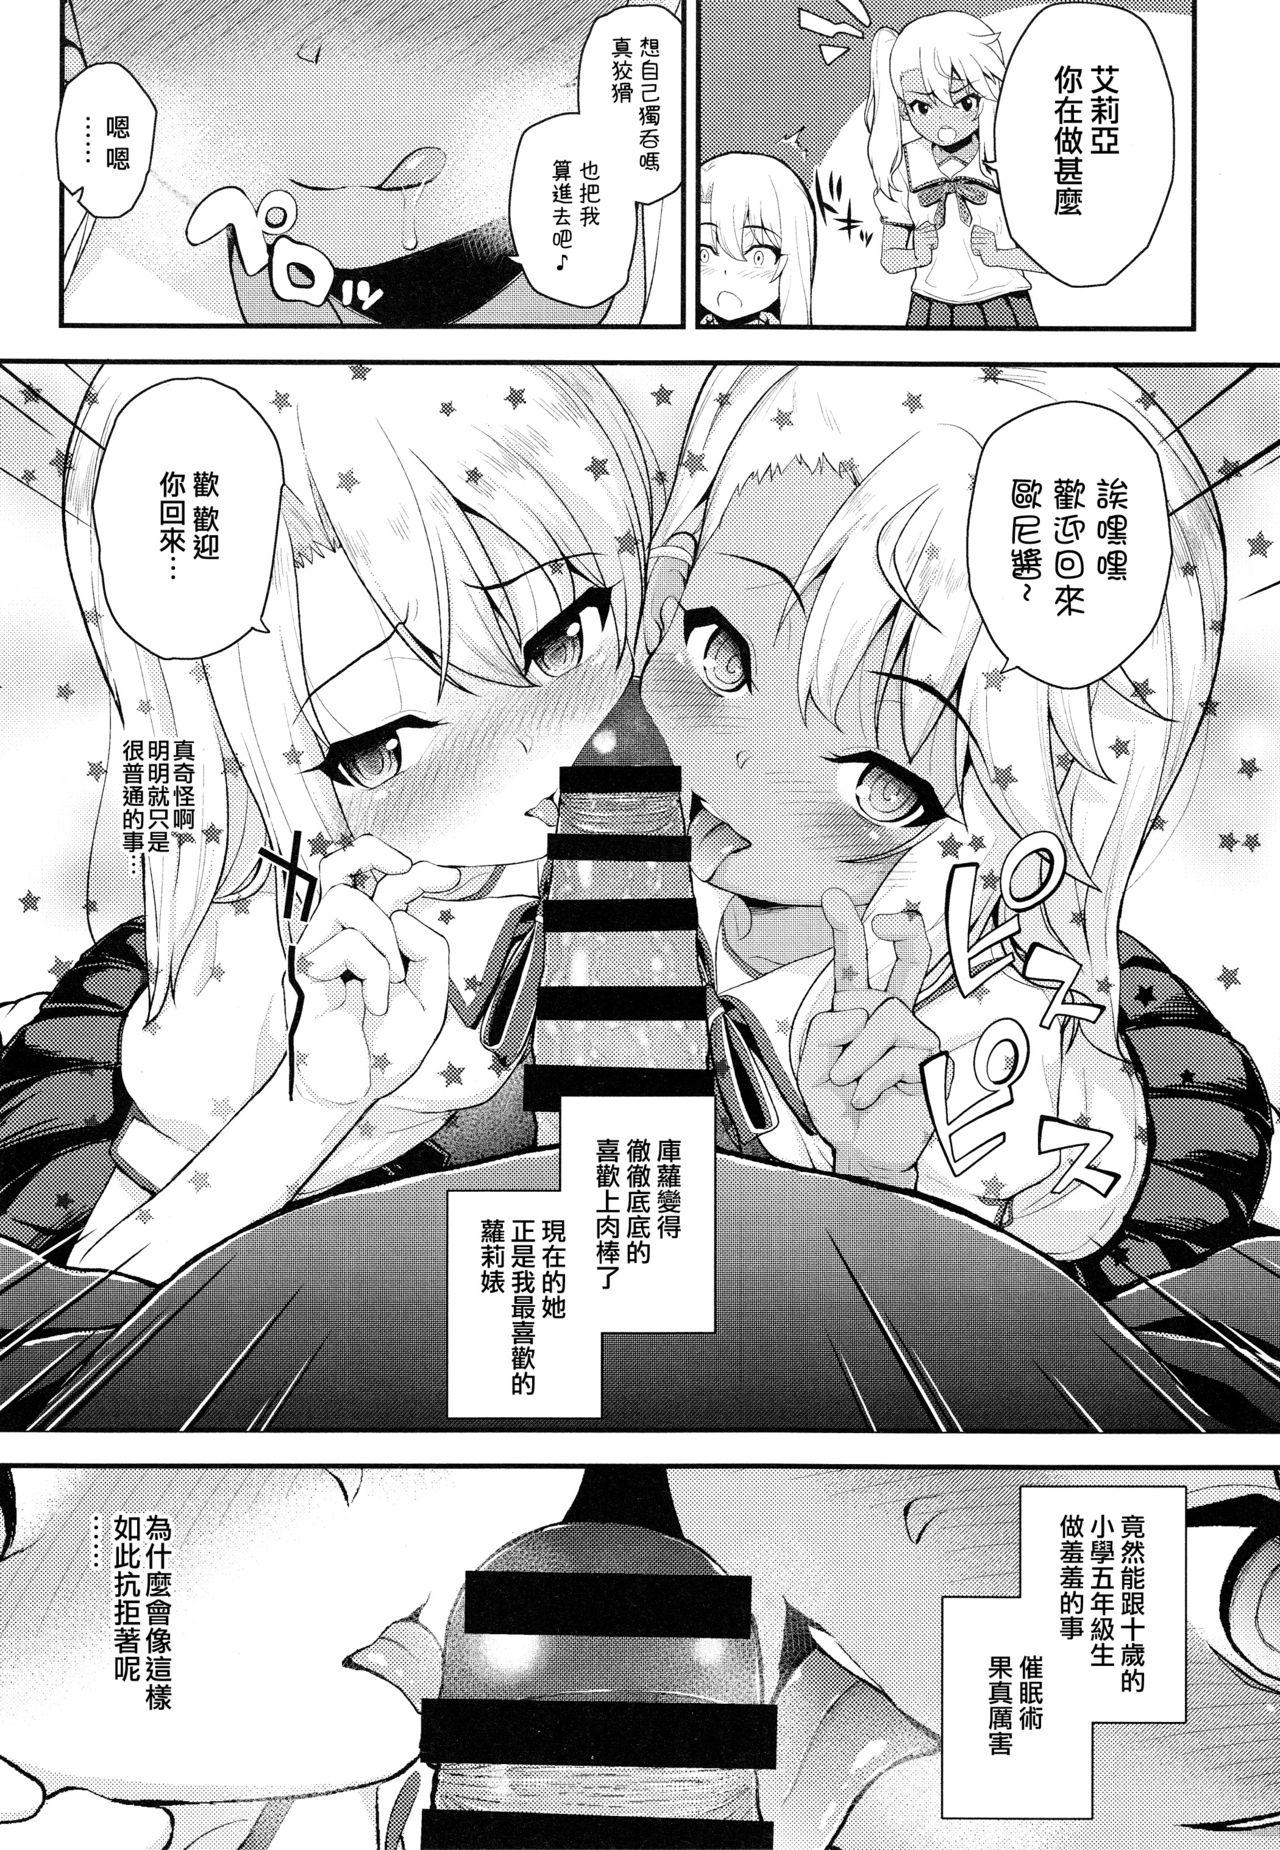 Submissive Saimin Choukyou Diary - Fate kaleid liner prisma illya Facials - Page 6